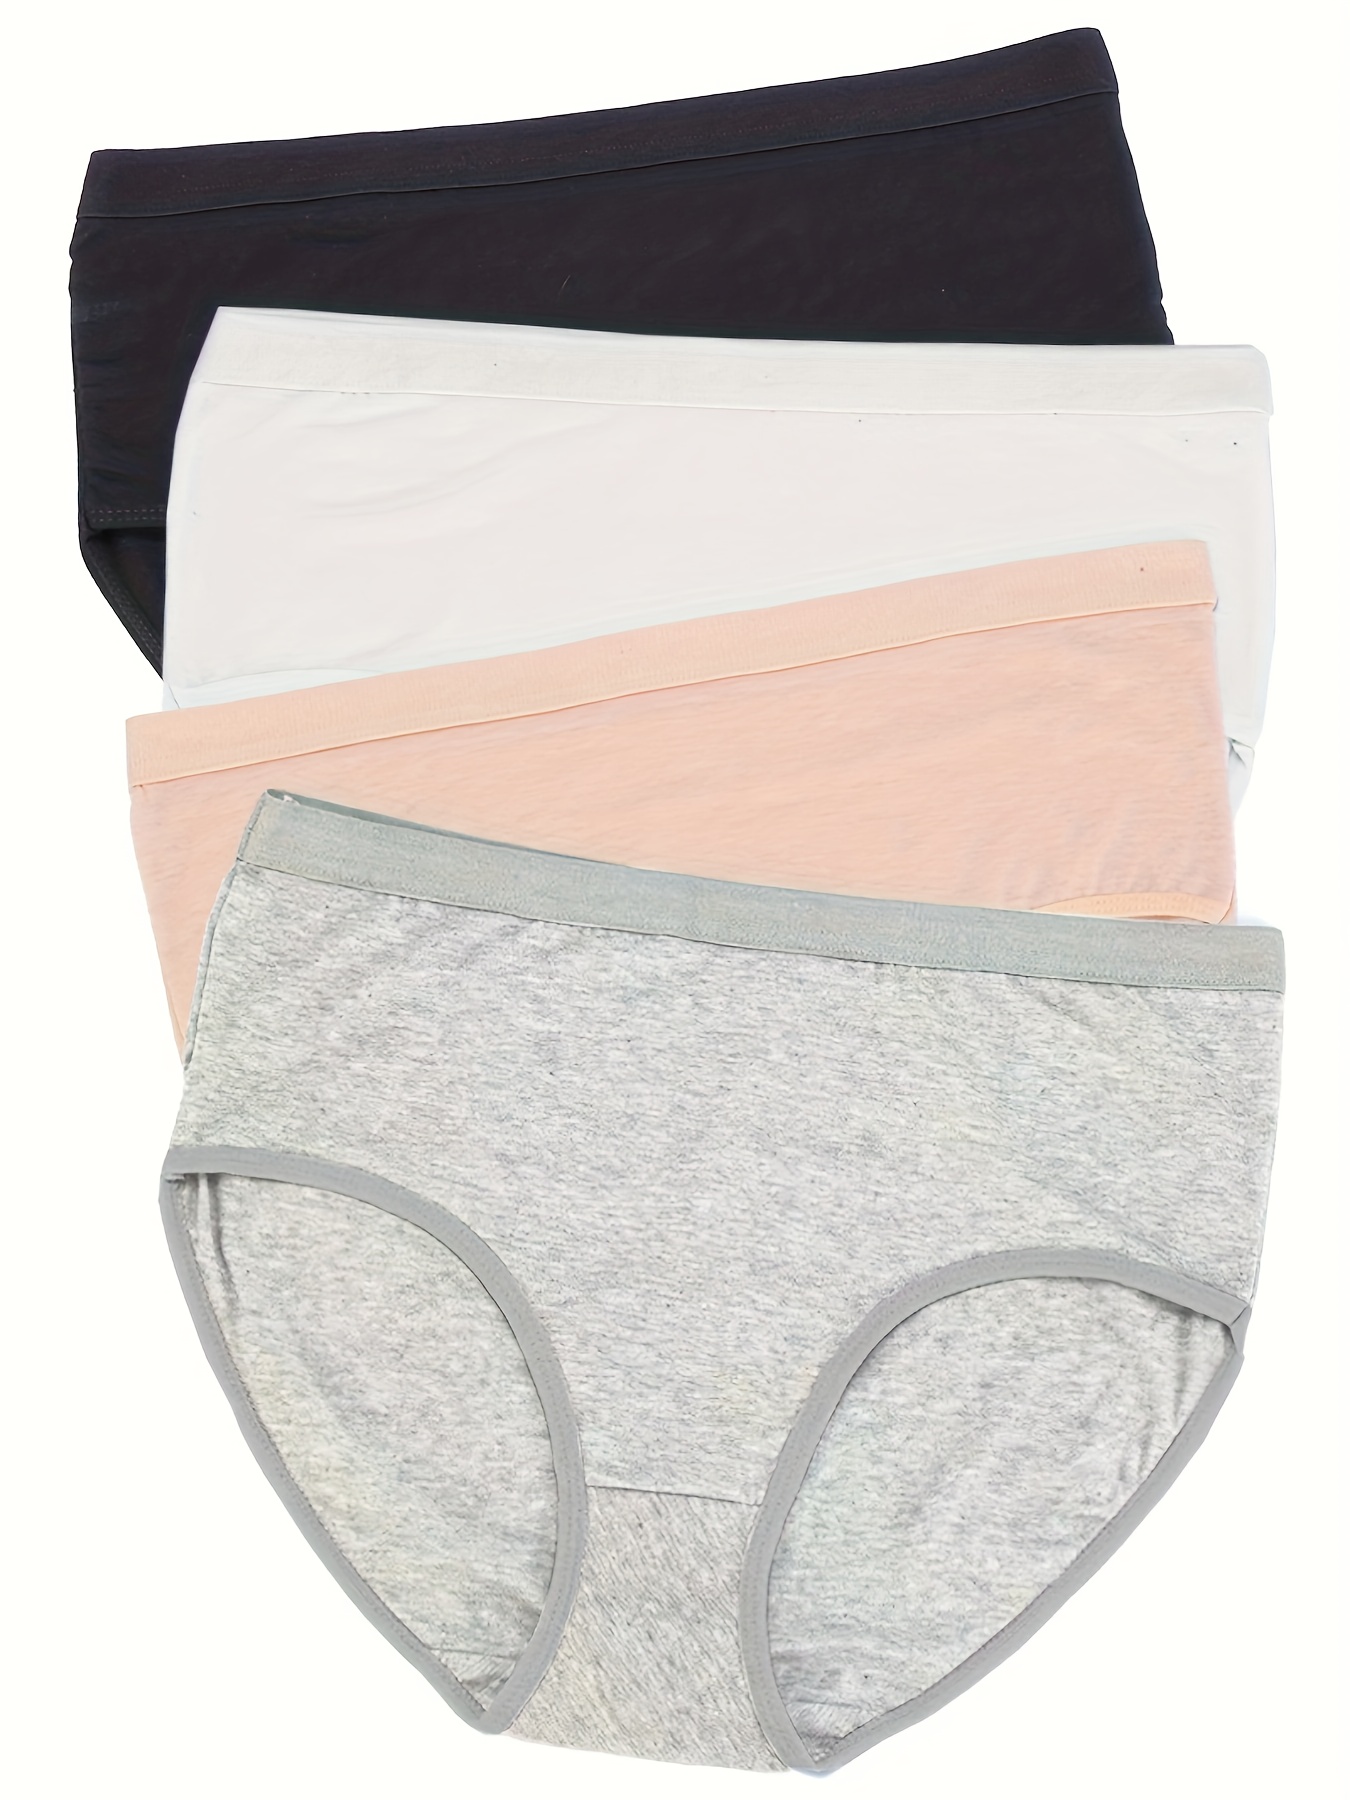 2 Pack of Stretch Cotton Hipster Panties - Solids